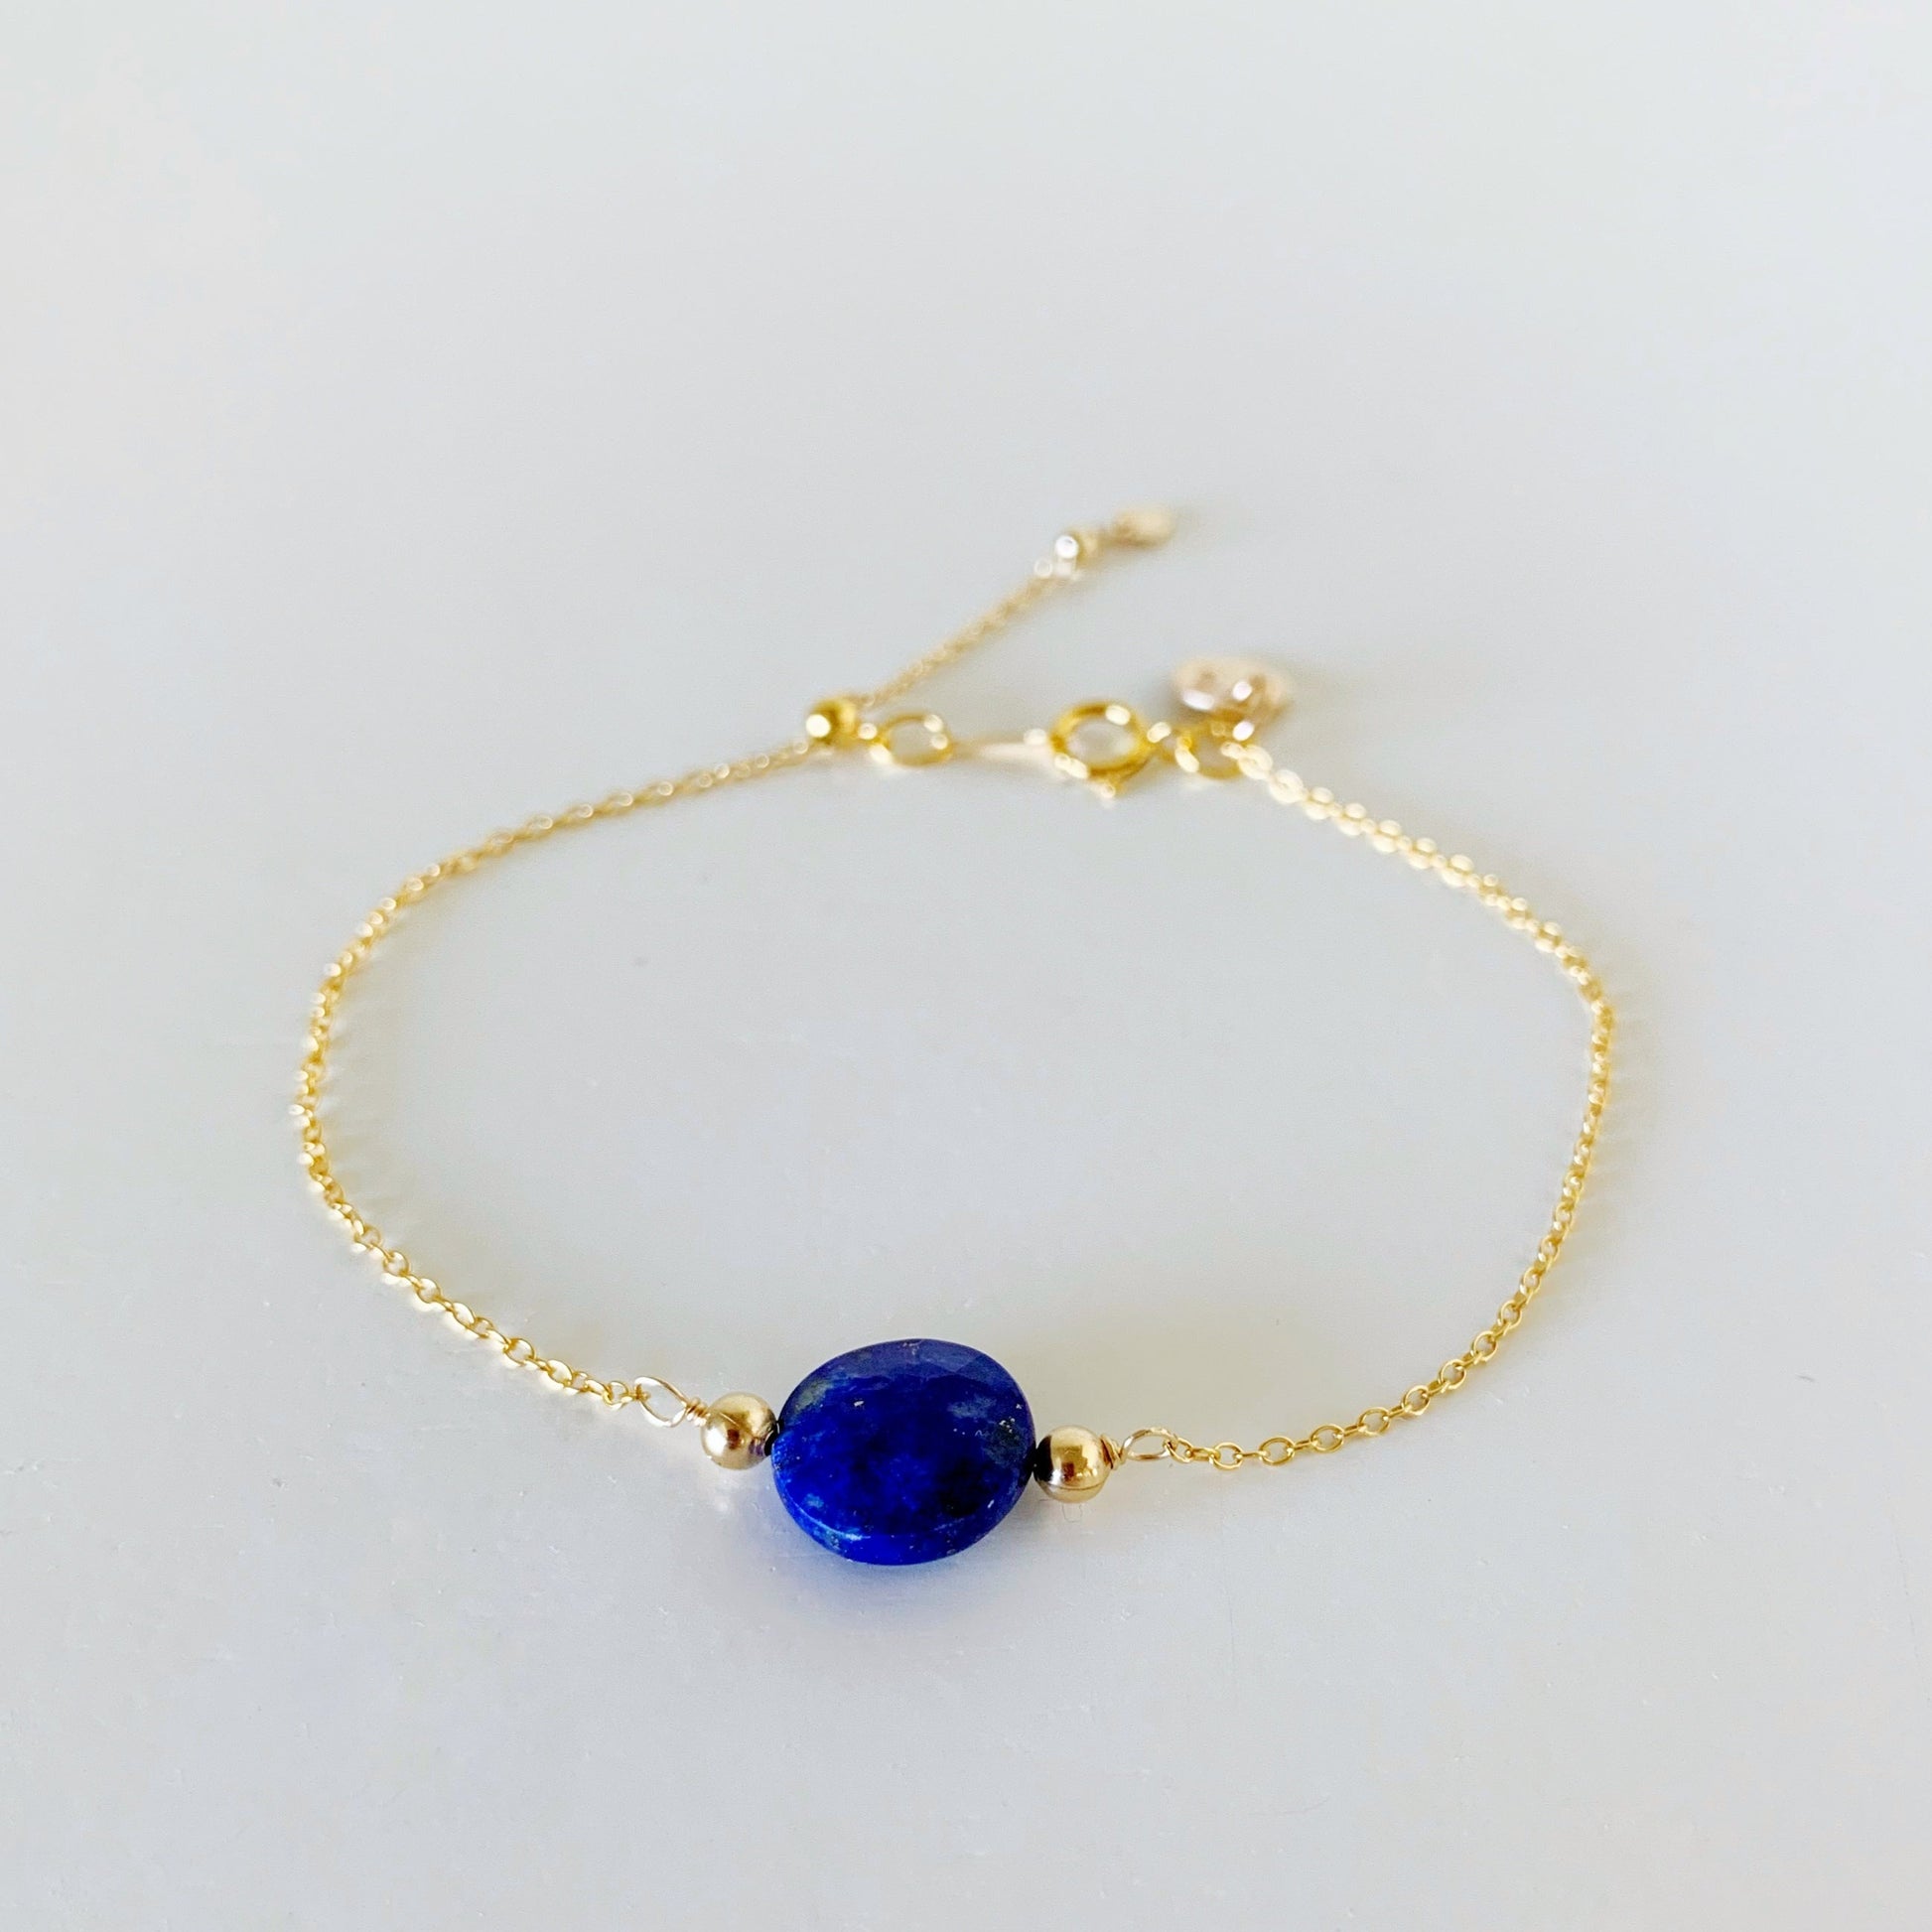 the neptune adjustable bracelet by mermaids and madeleines is a 14k gold filled chain based bracelet with a silicone slide bead at the clasp. theres also a royal blue lapis faceted coin bead at the center of the bracelet. this piece is photographed on a white surface